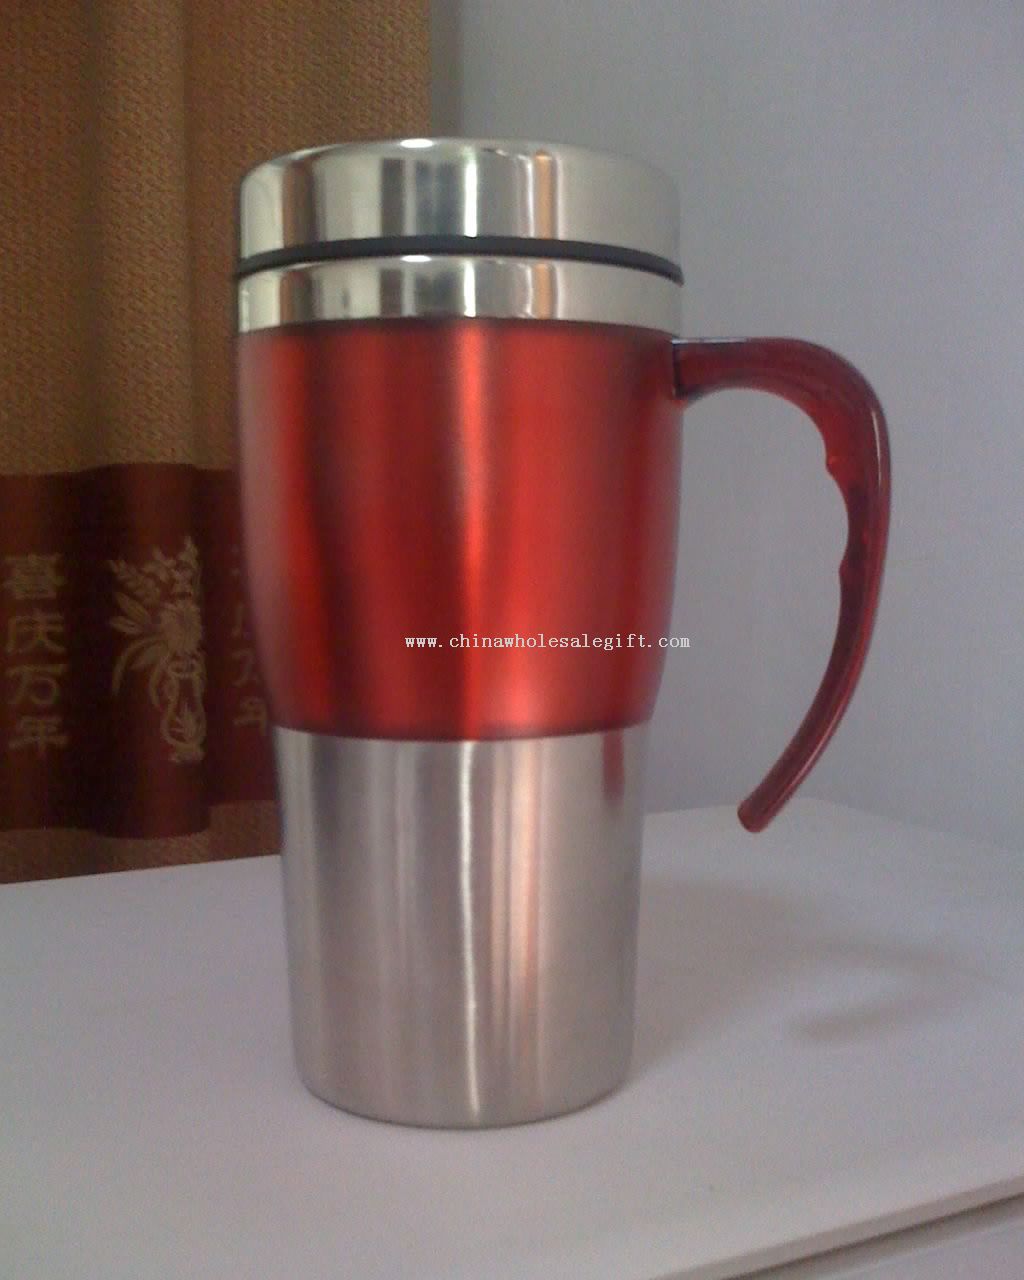 16oz stainless steel travel mug with transparent plastic outer and handle